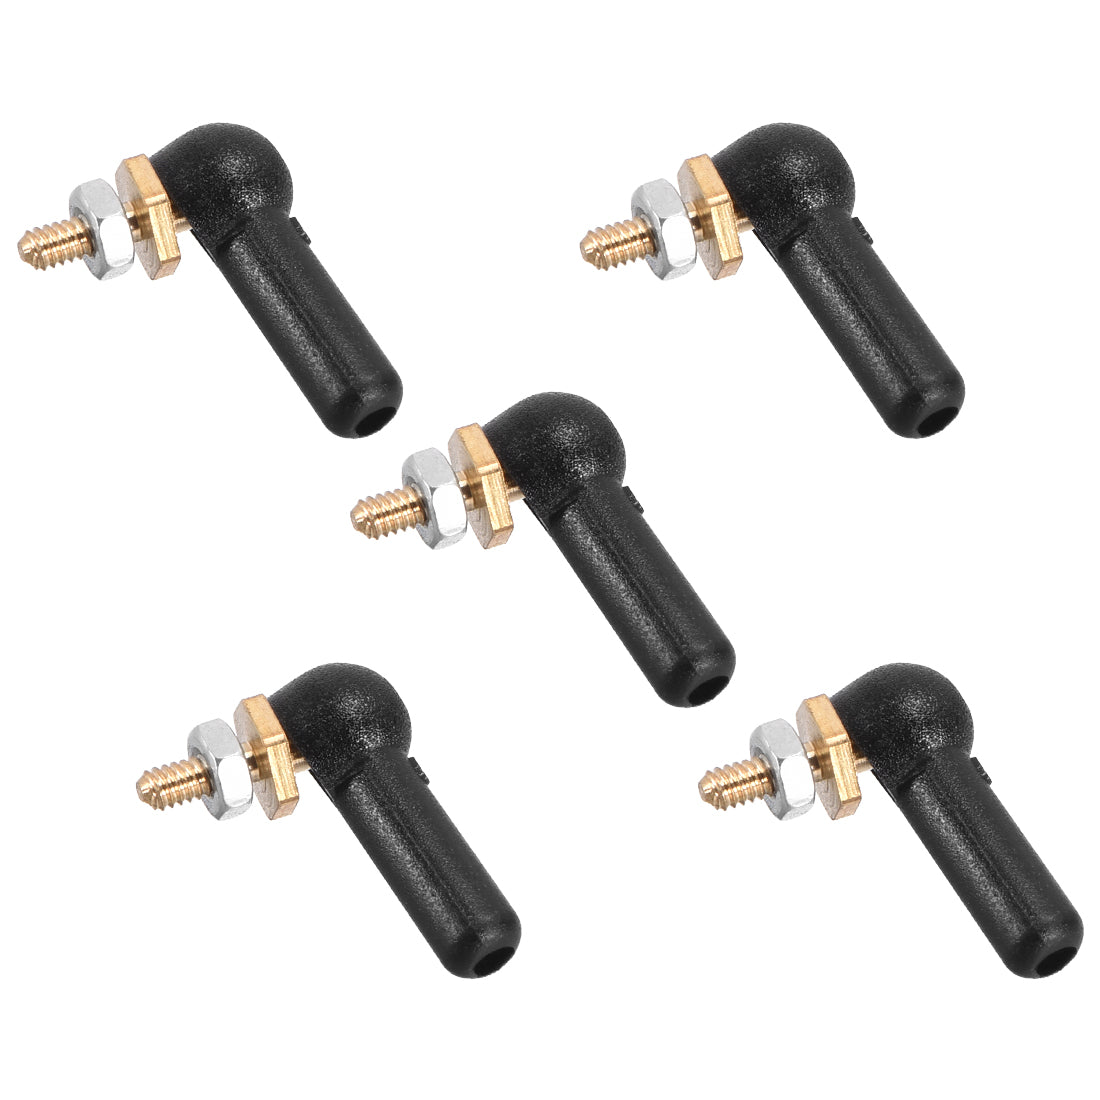 uxcell Uxcell 5 PCS 2mm/M2 Linkage End Tie Rod End Metal Ball Head Black for RC Boat  Airplane Robot